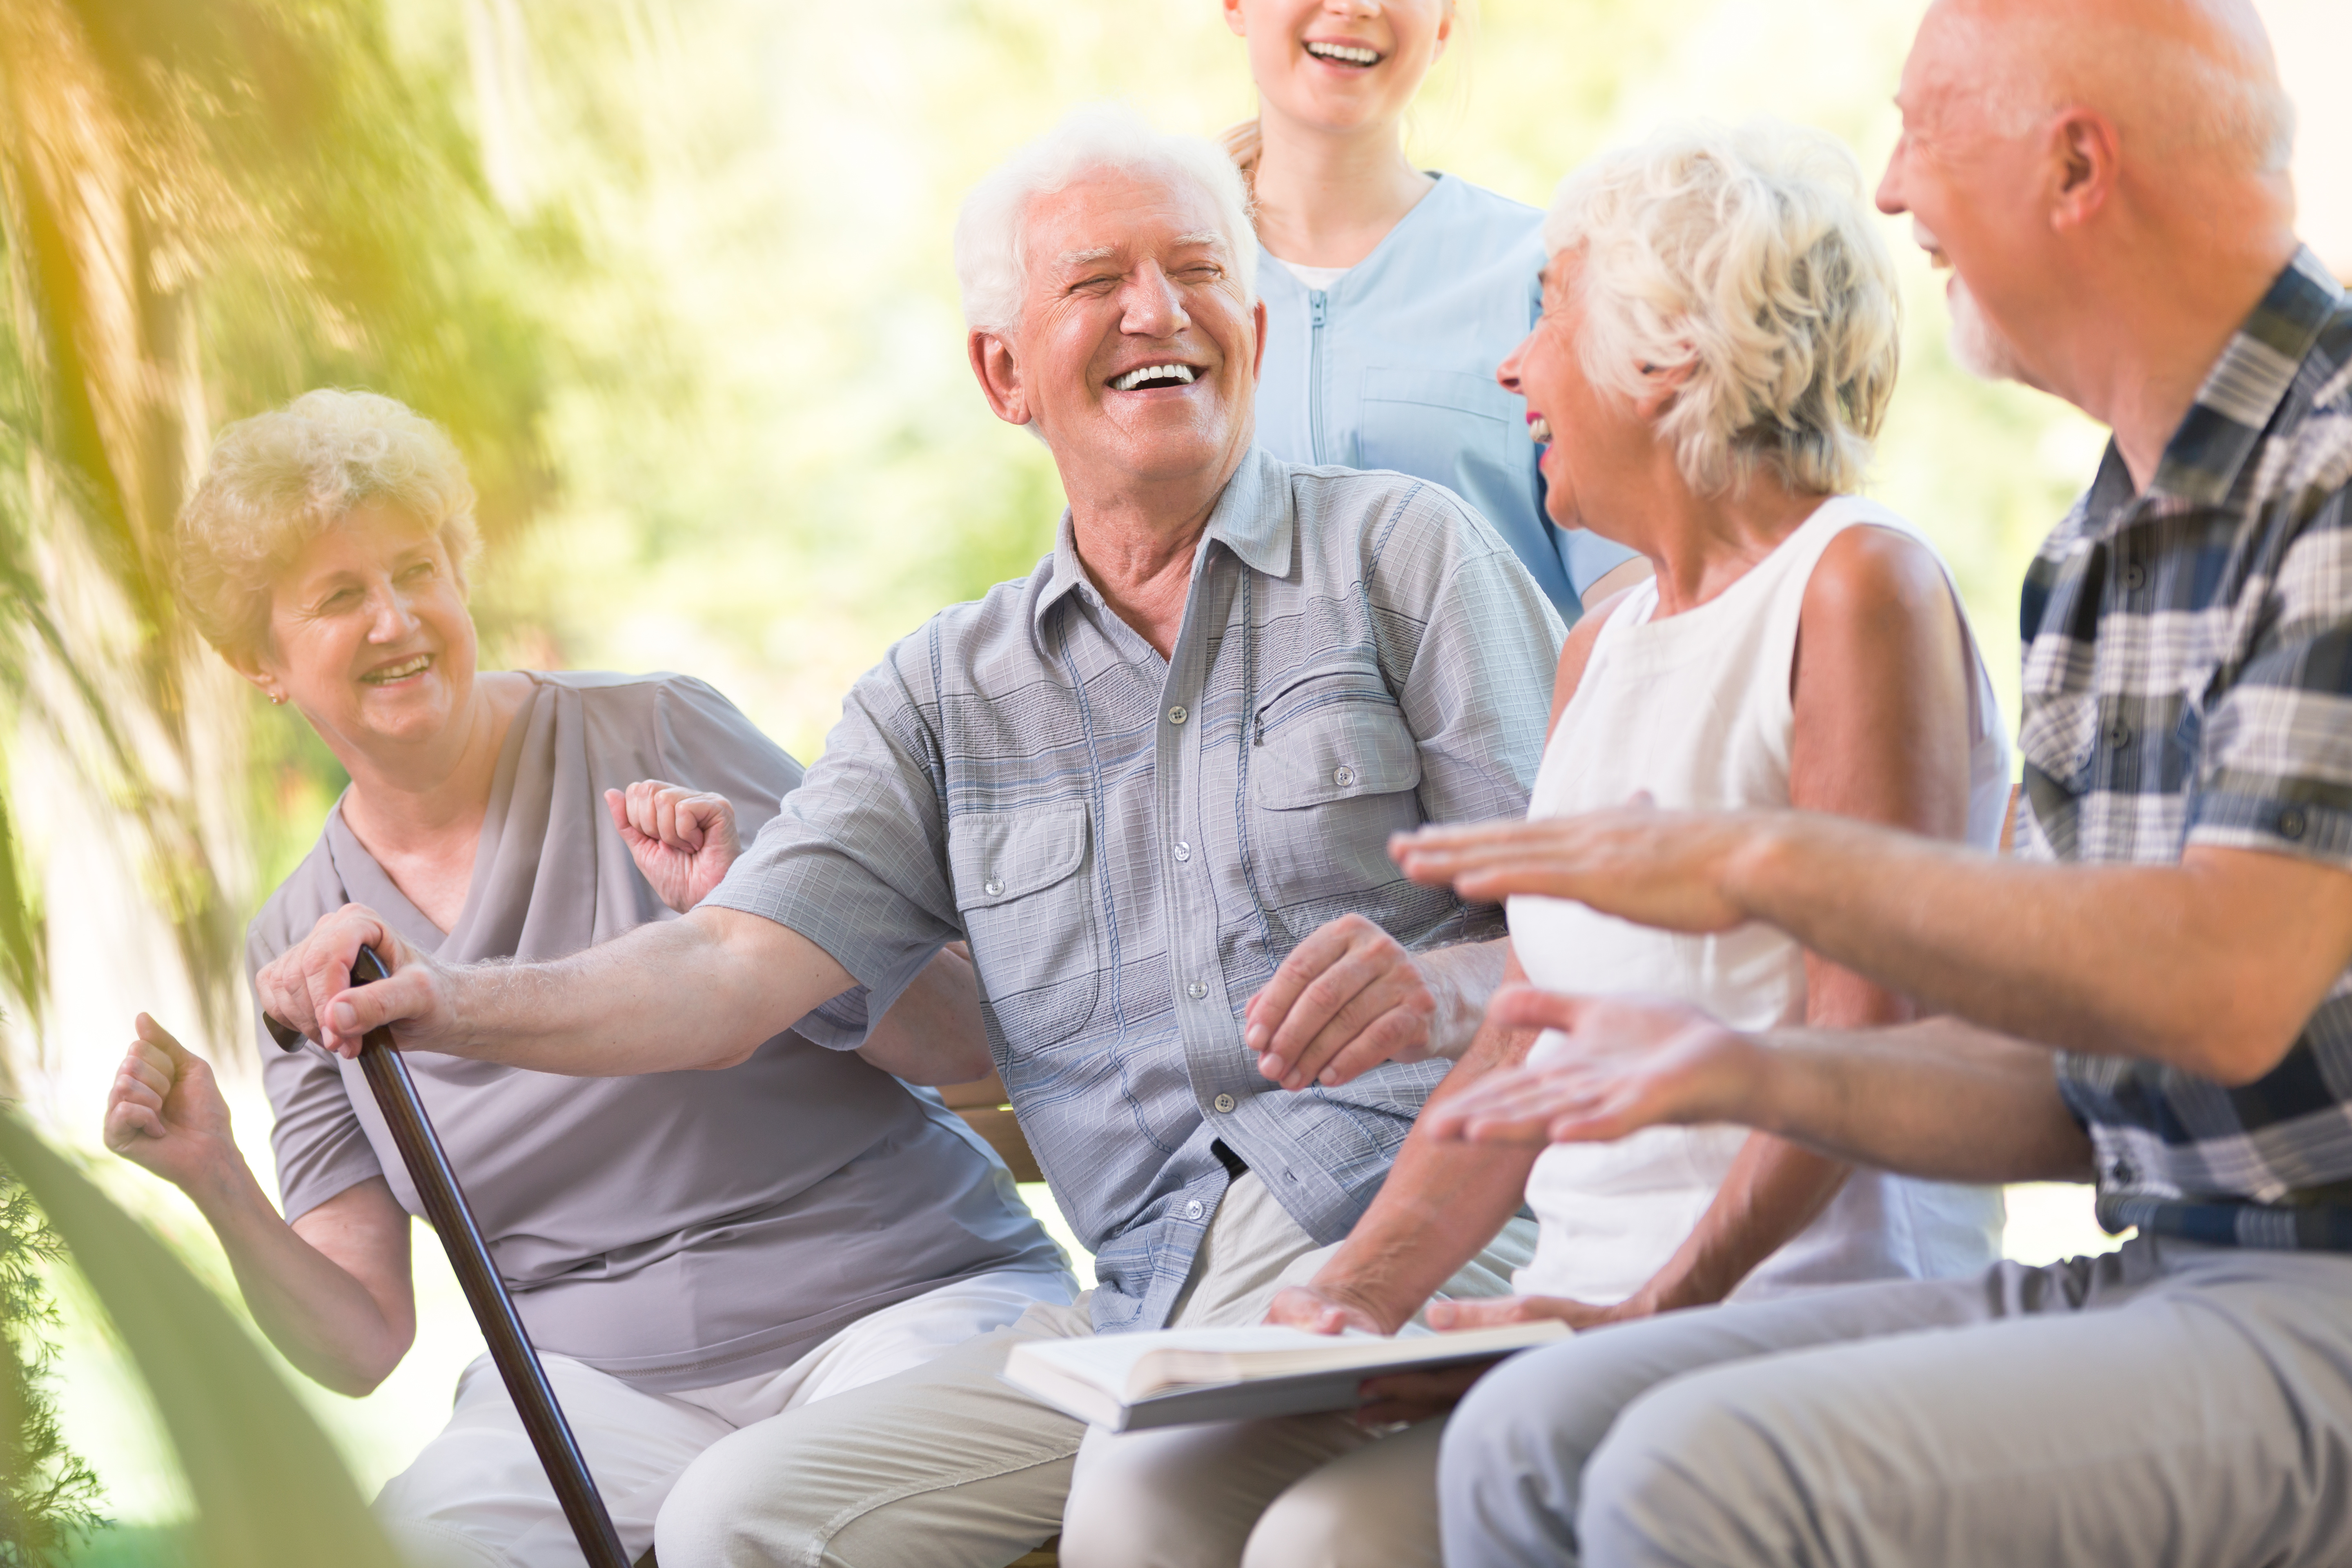 Opening Up the Topic of Assisted Living to Your Parents